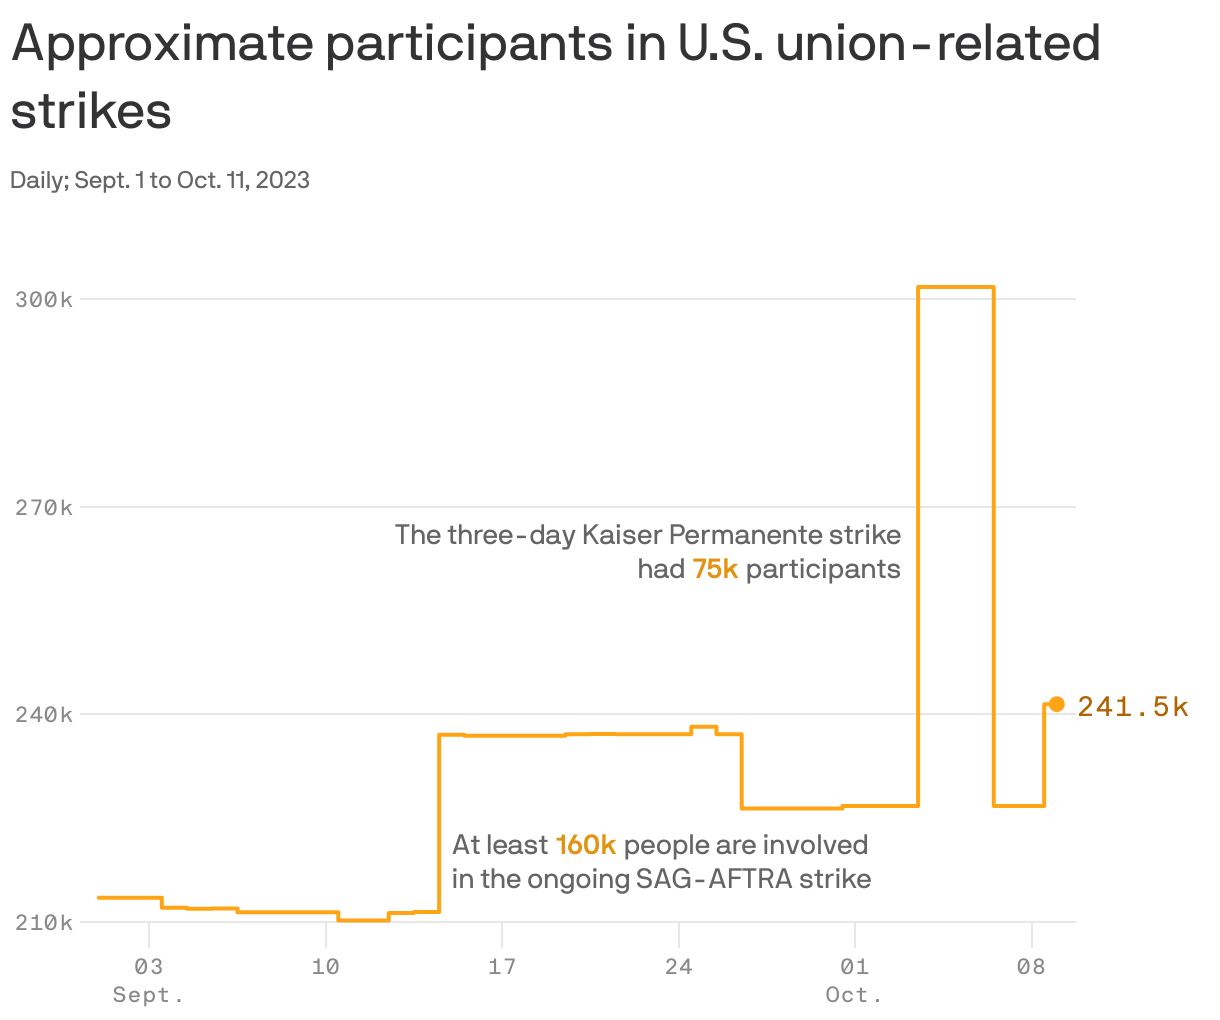 Approximate participants in U.S. union-related strikes